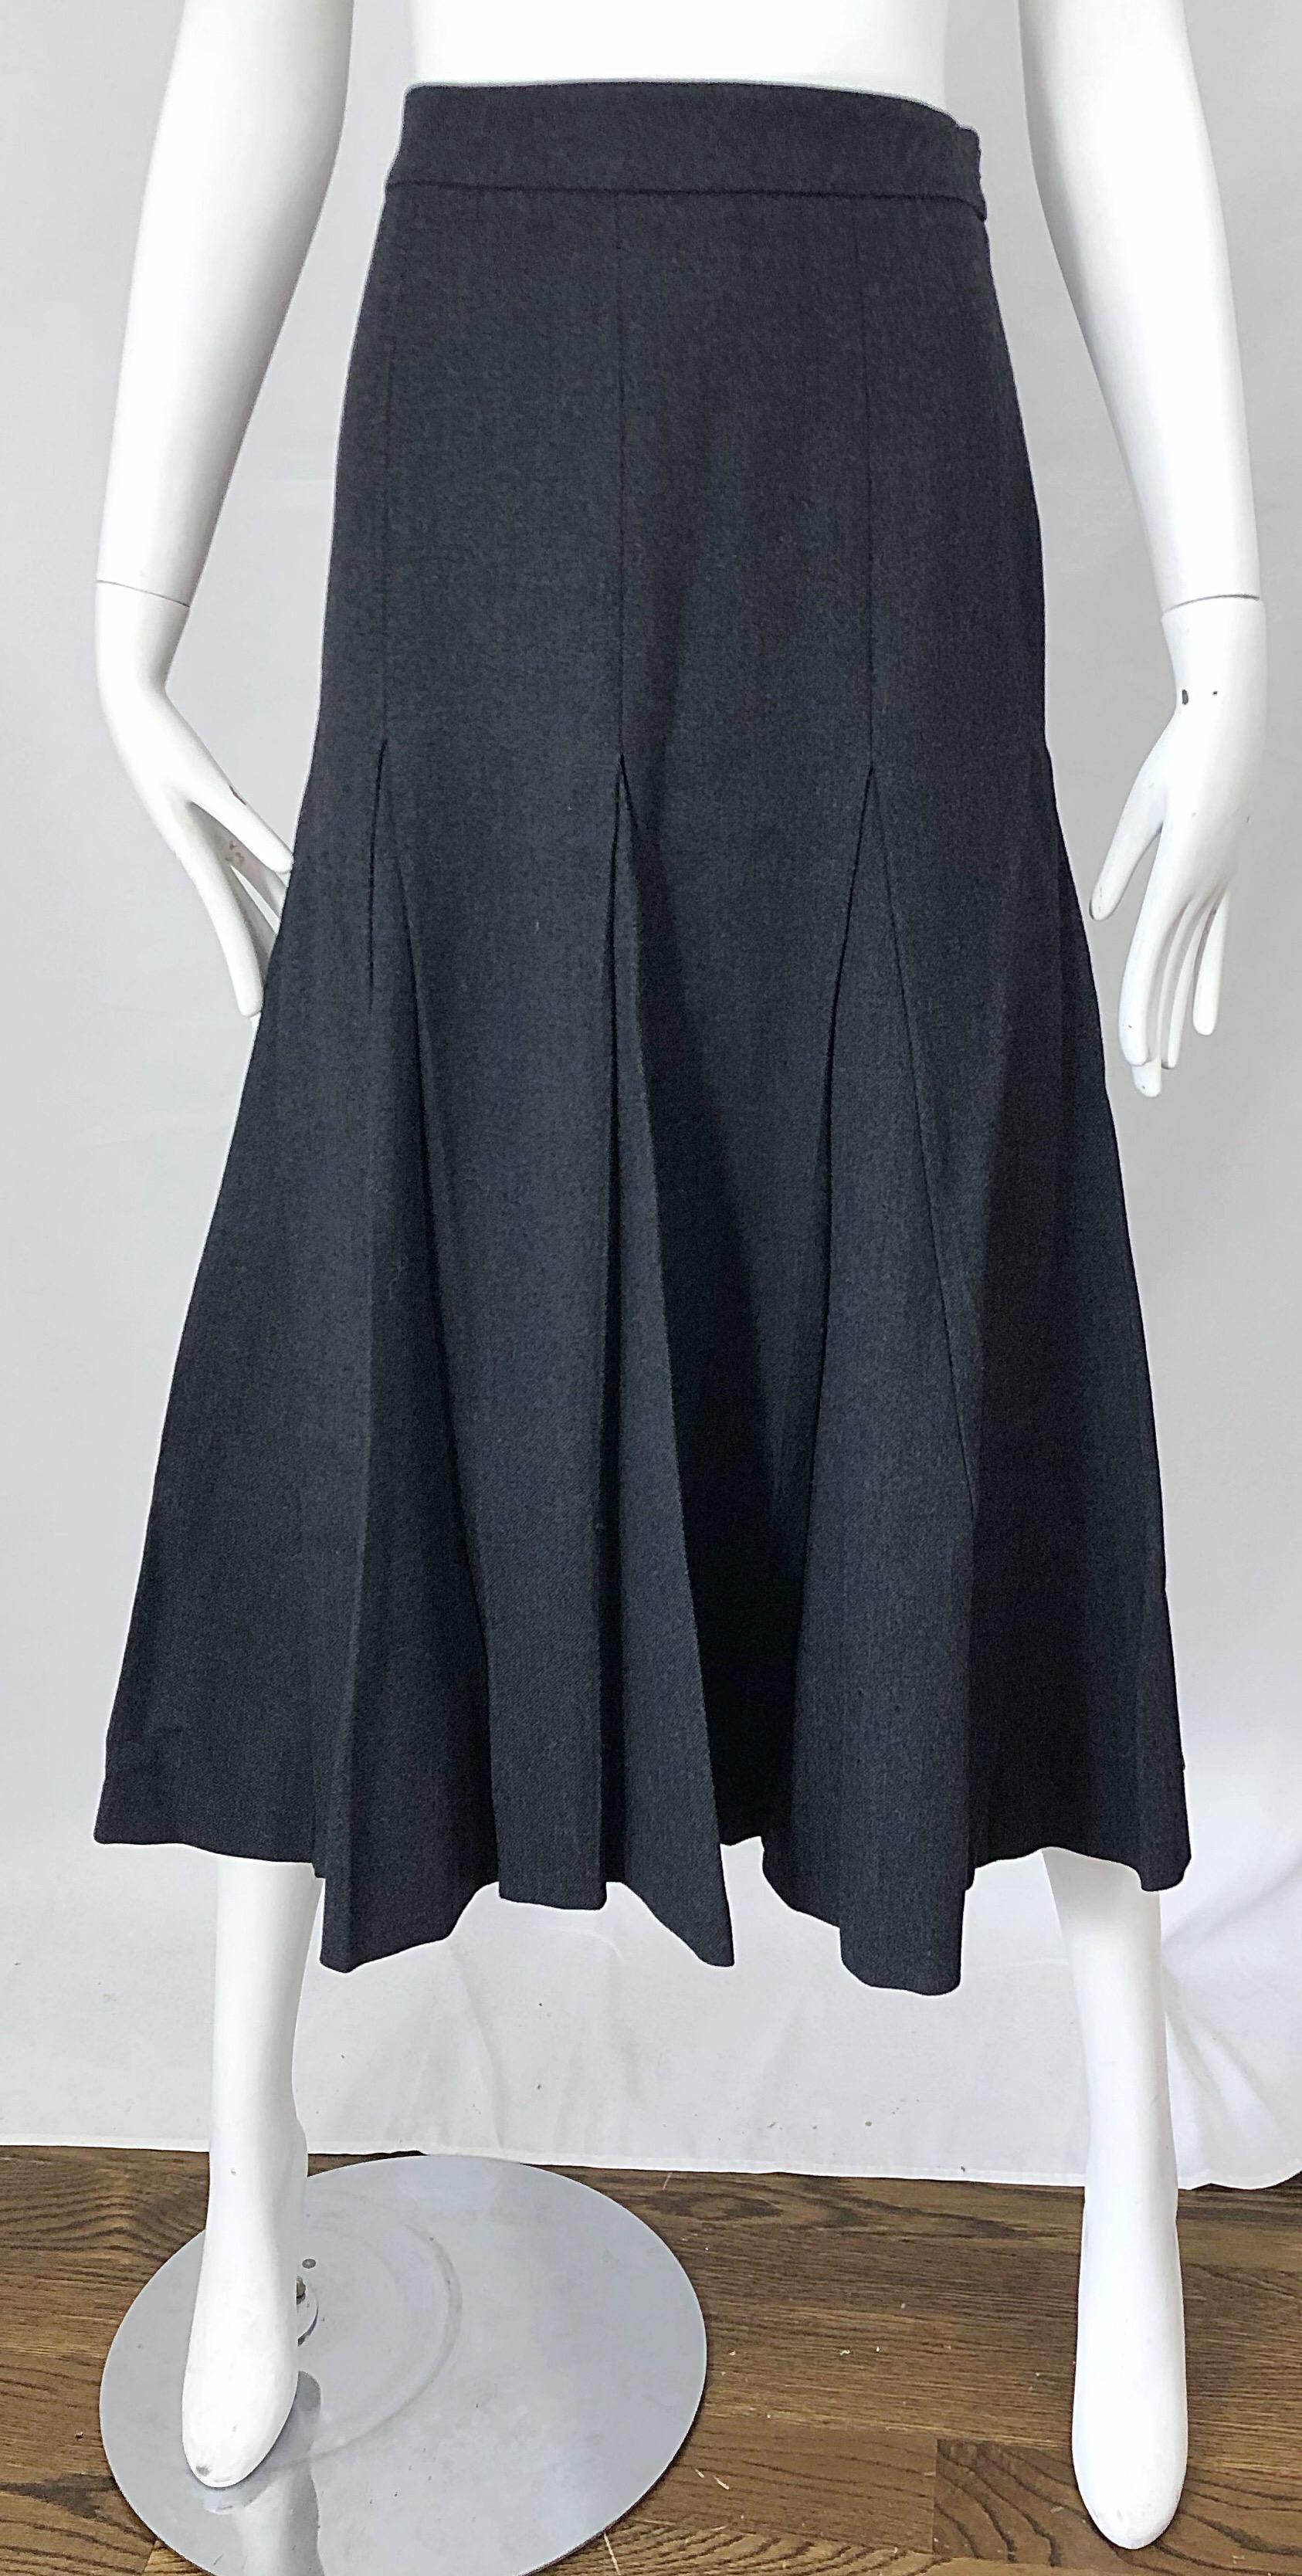 Late 90s PRADA grey wool high waisted pleated trumpet midi skirt! Features the perfect gray color that goes with anything. Hidden zipper up the side with button closure. Can easily be dressed up or down. Great with a sweater or crisp blouse. In